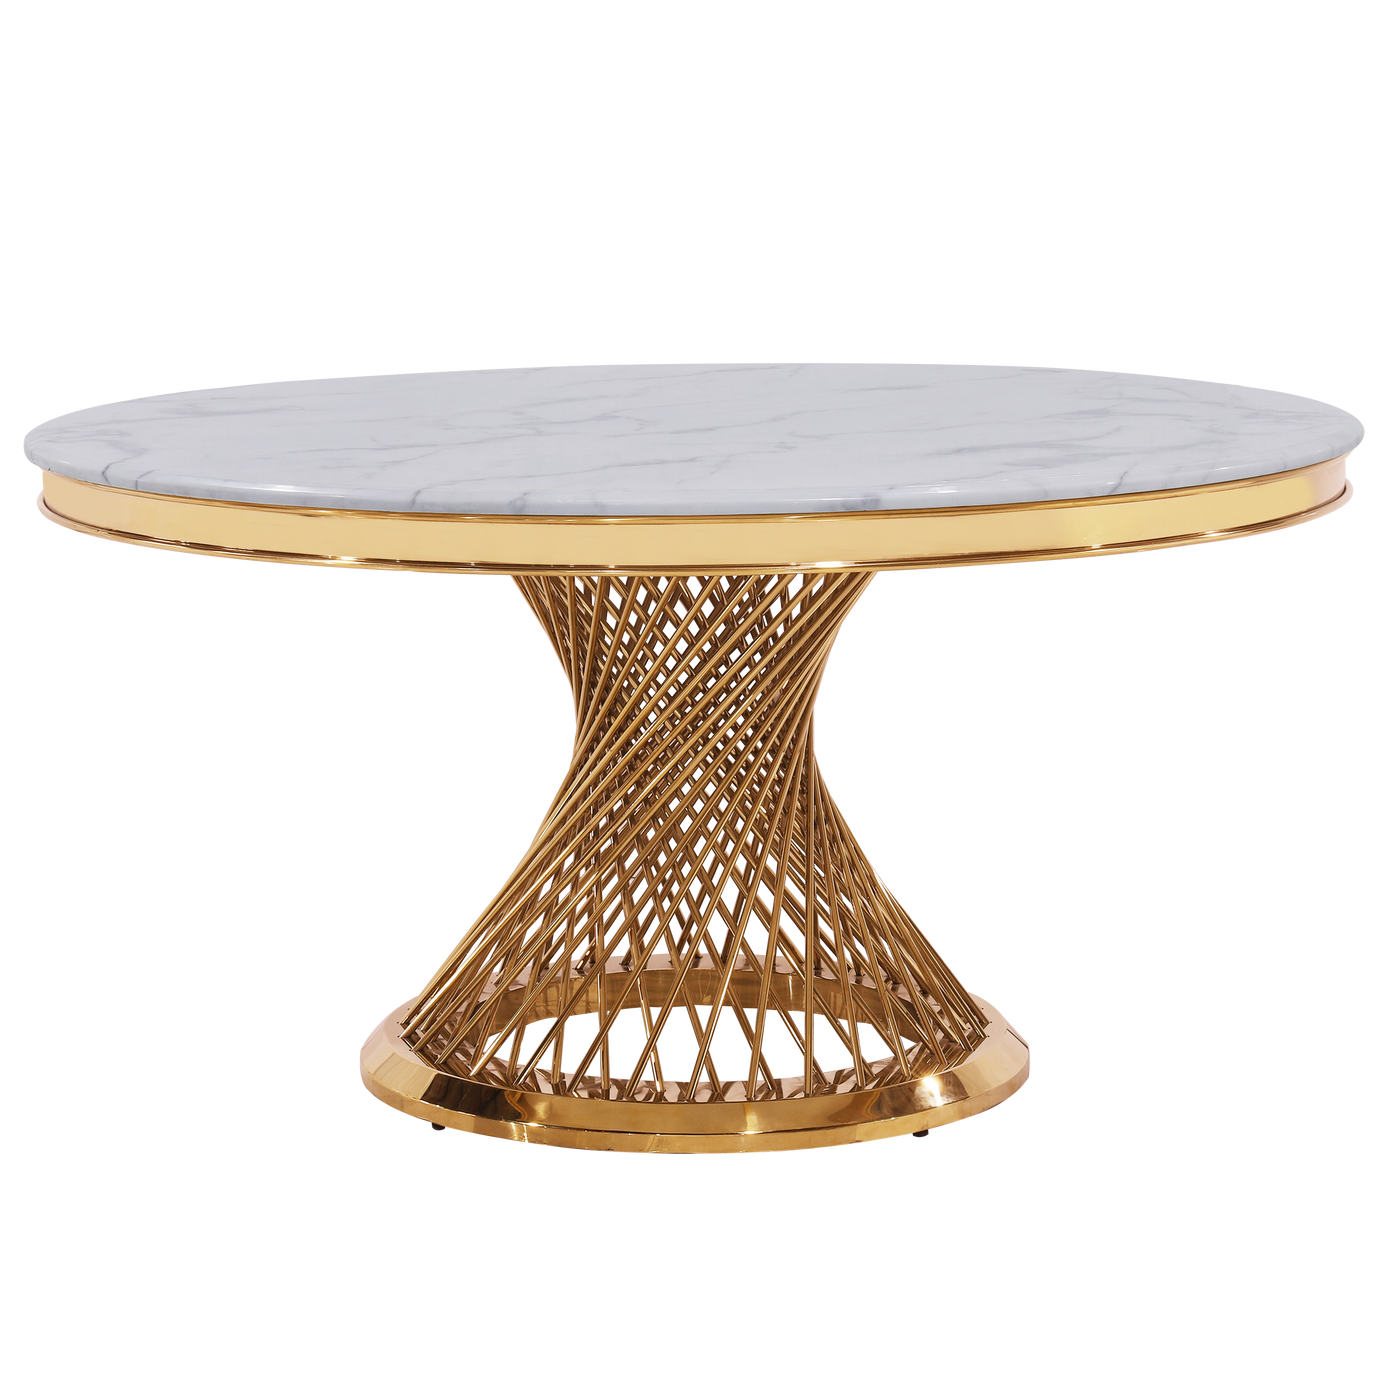 Dupont Round Dining Table - 1.5m